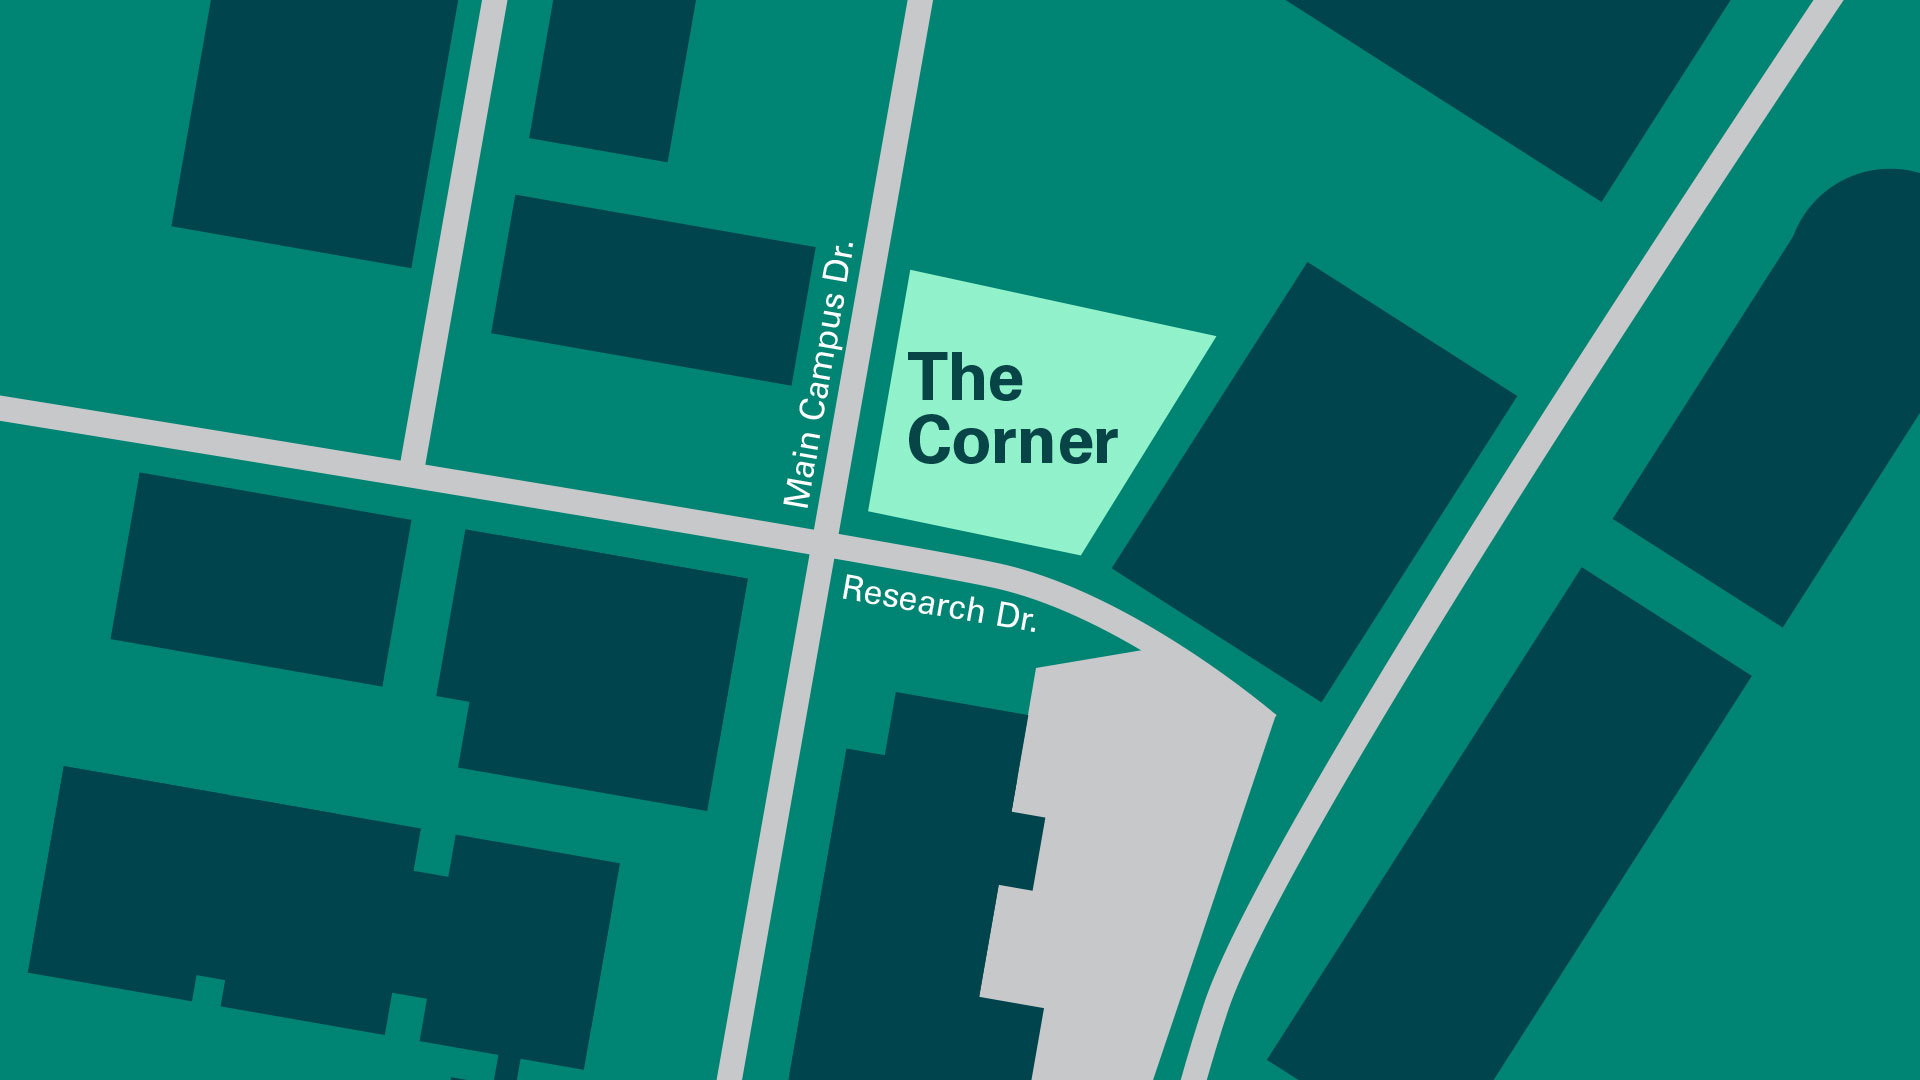 The Corner is located on NC State's Centennial Campus on the corner of Main Campus Dr. and Research Dr.d 